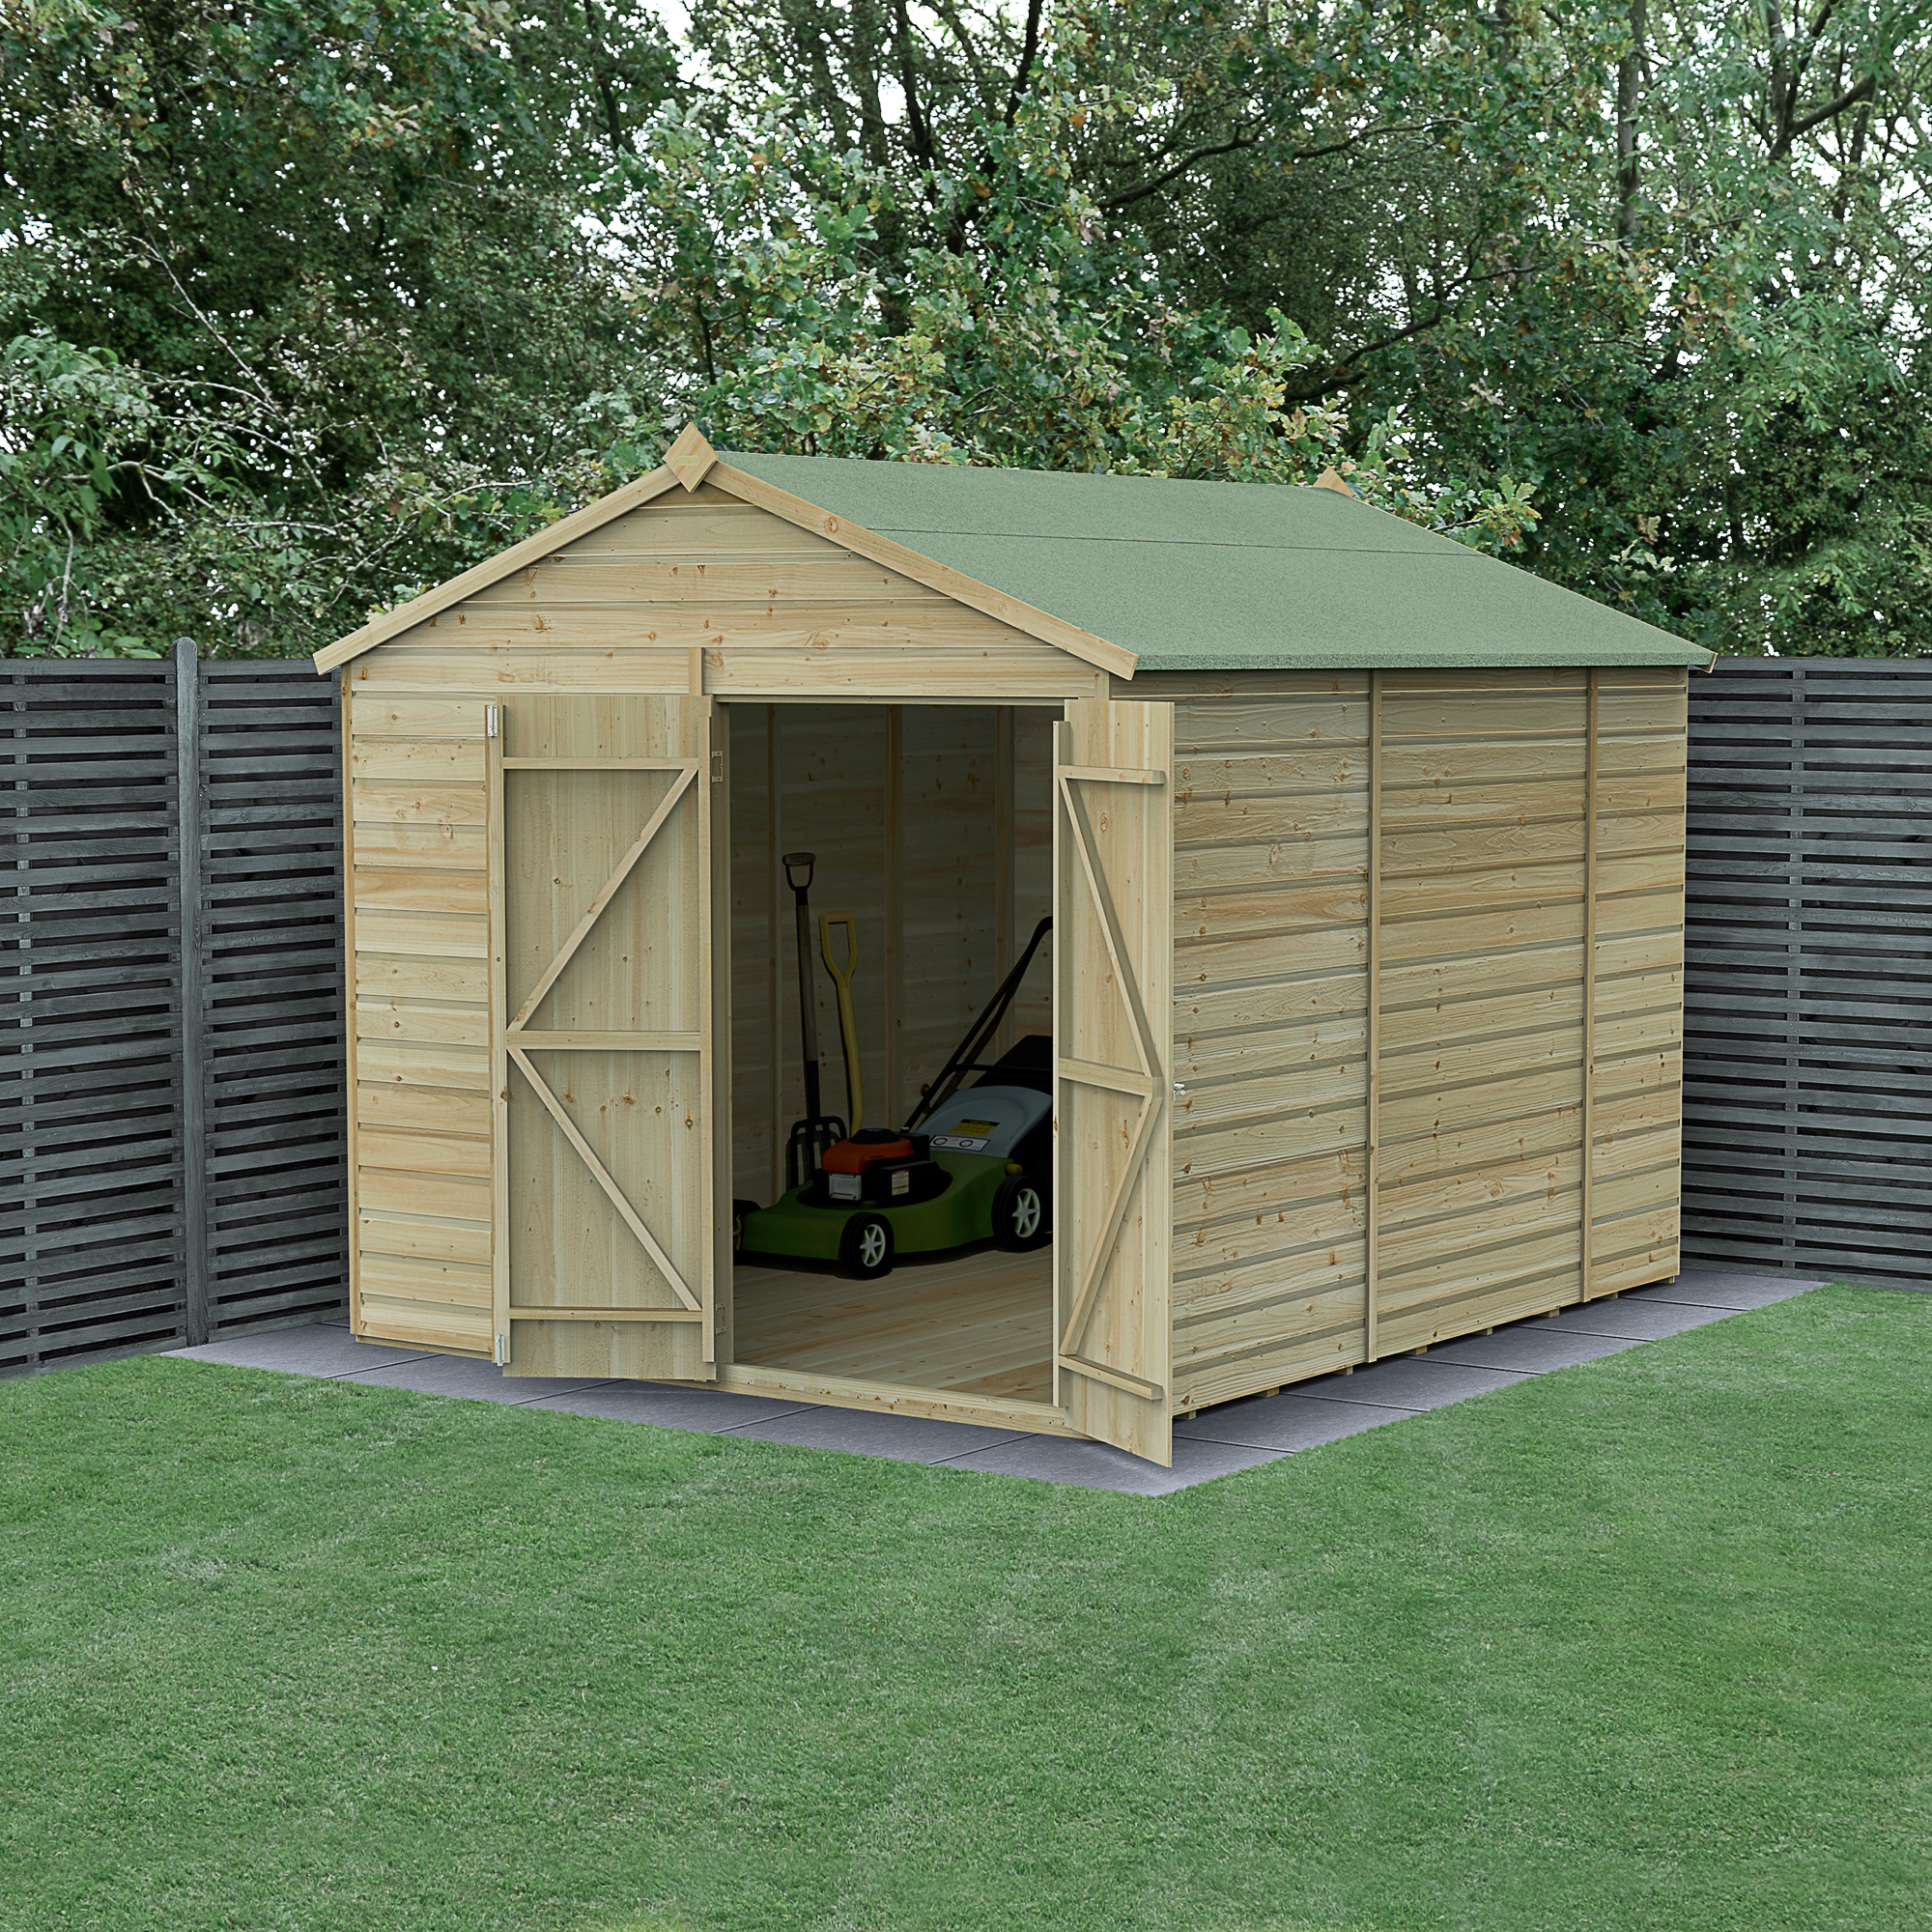 Forest Garden Beckwood 8 x 10ft Apex Shiplap Pressure Treated Double Door Windowless Shed